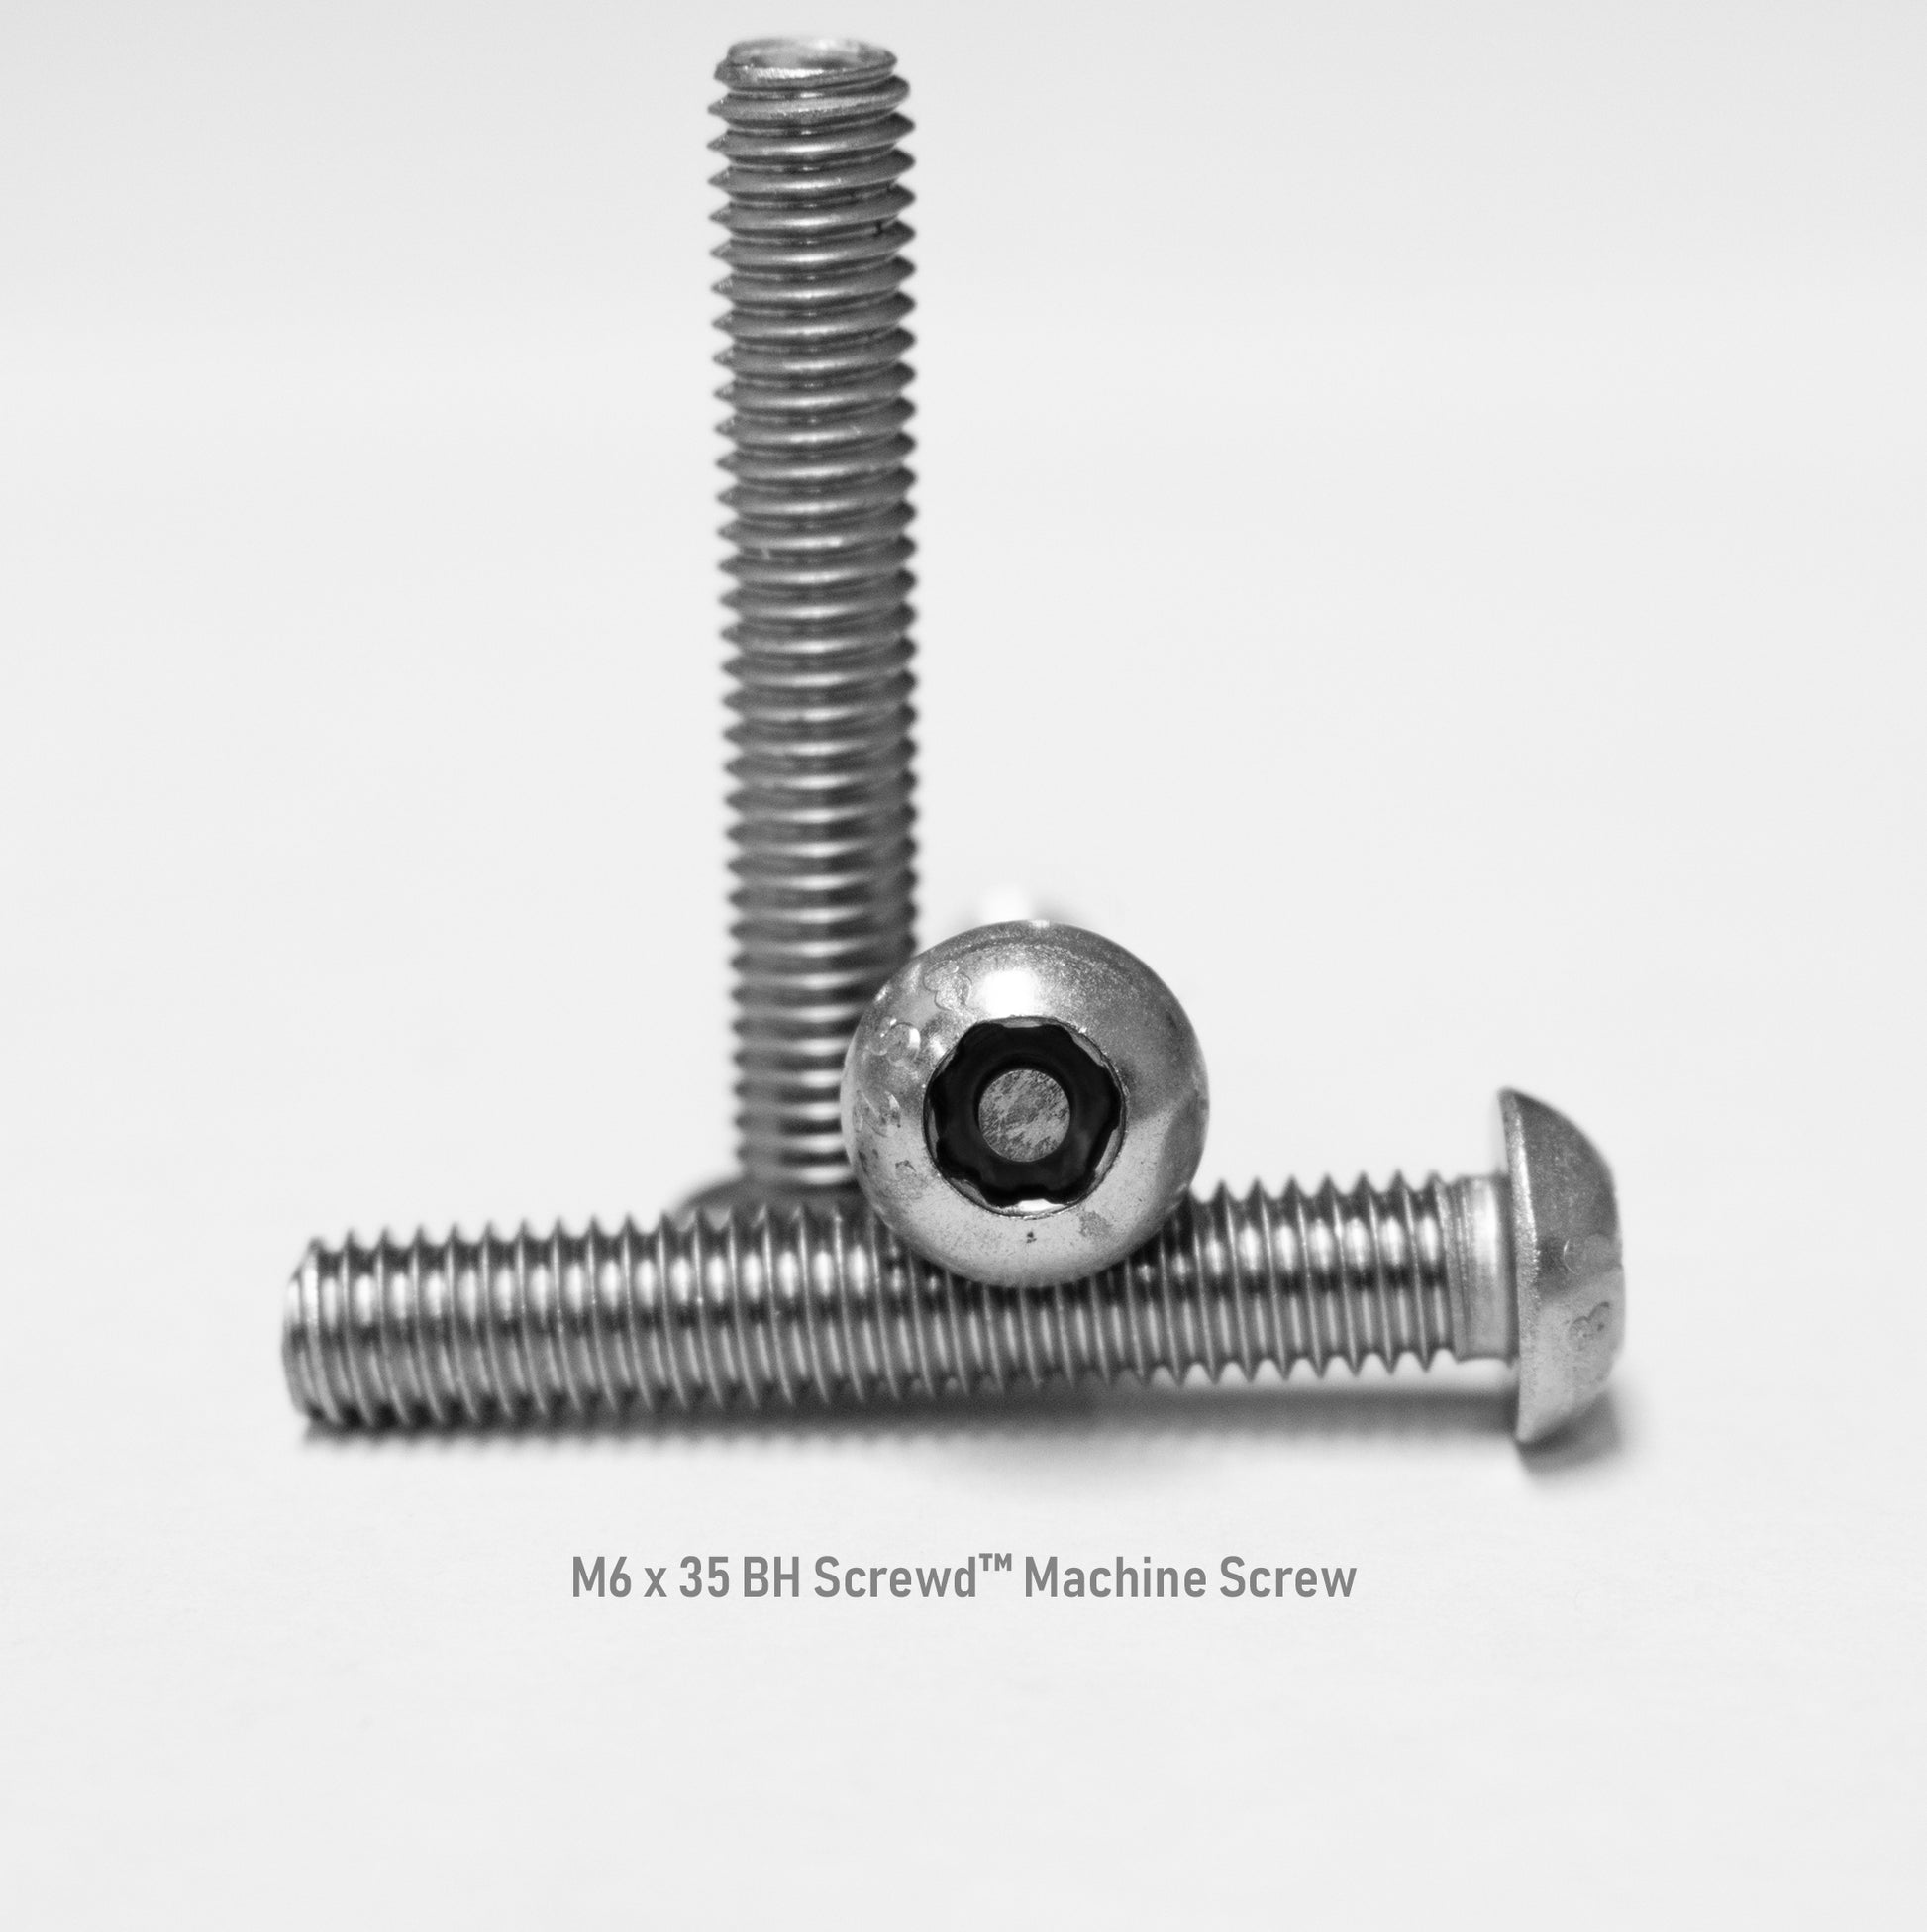 M6 x 35 Button Head Screwd® Security Metric Machine Screw Made out of Stainless Steel